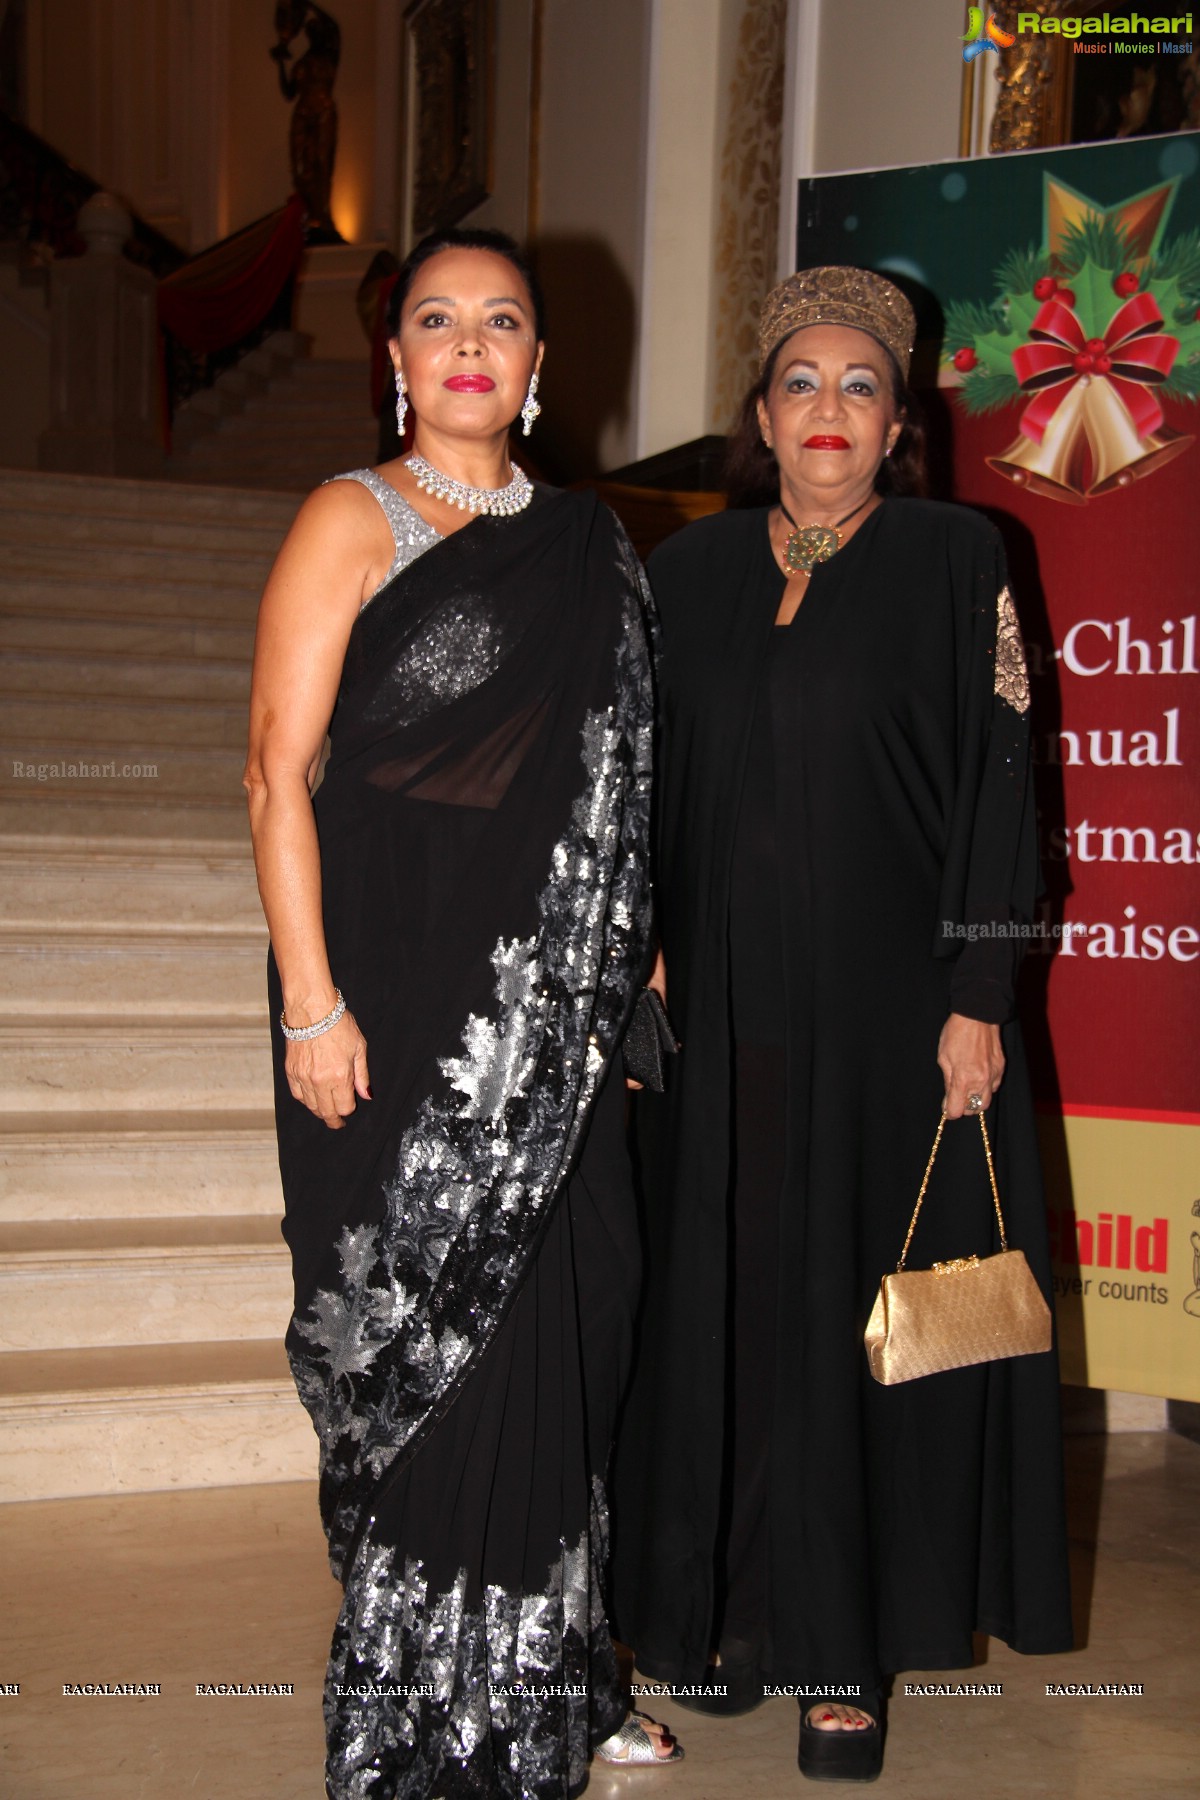 Heal A Child Foundation - The Annual Christmas Fundraiser 2015 Event